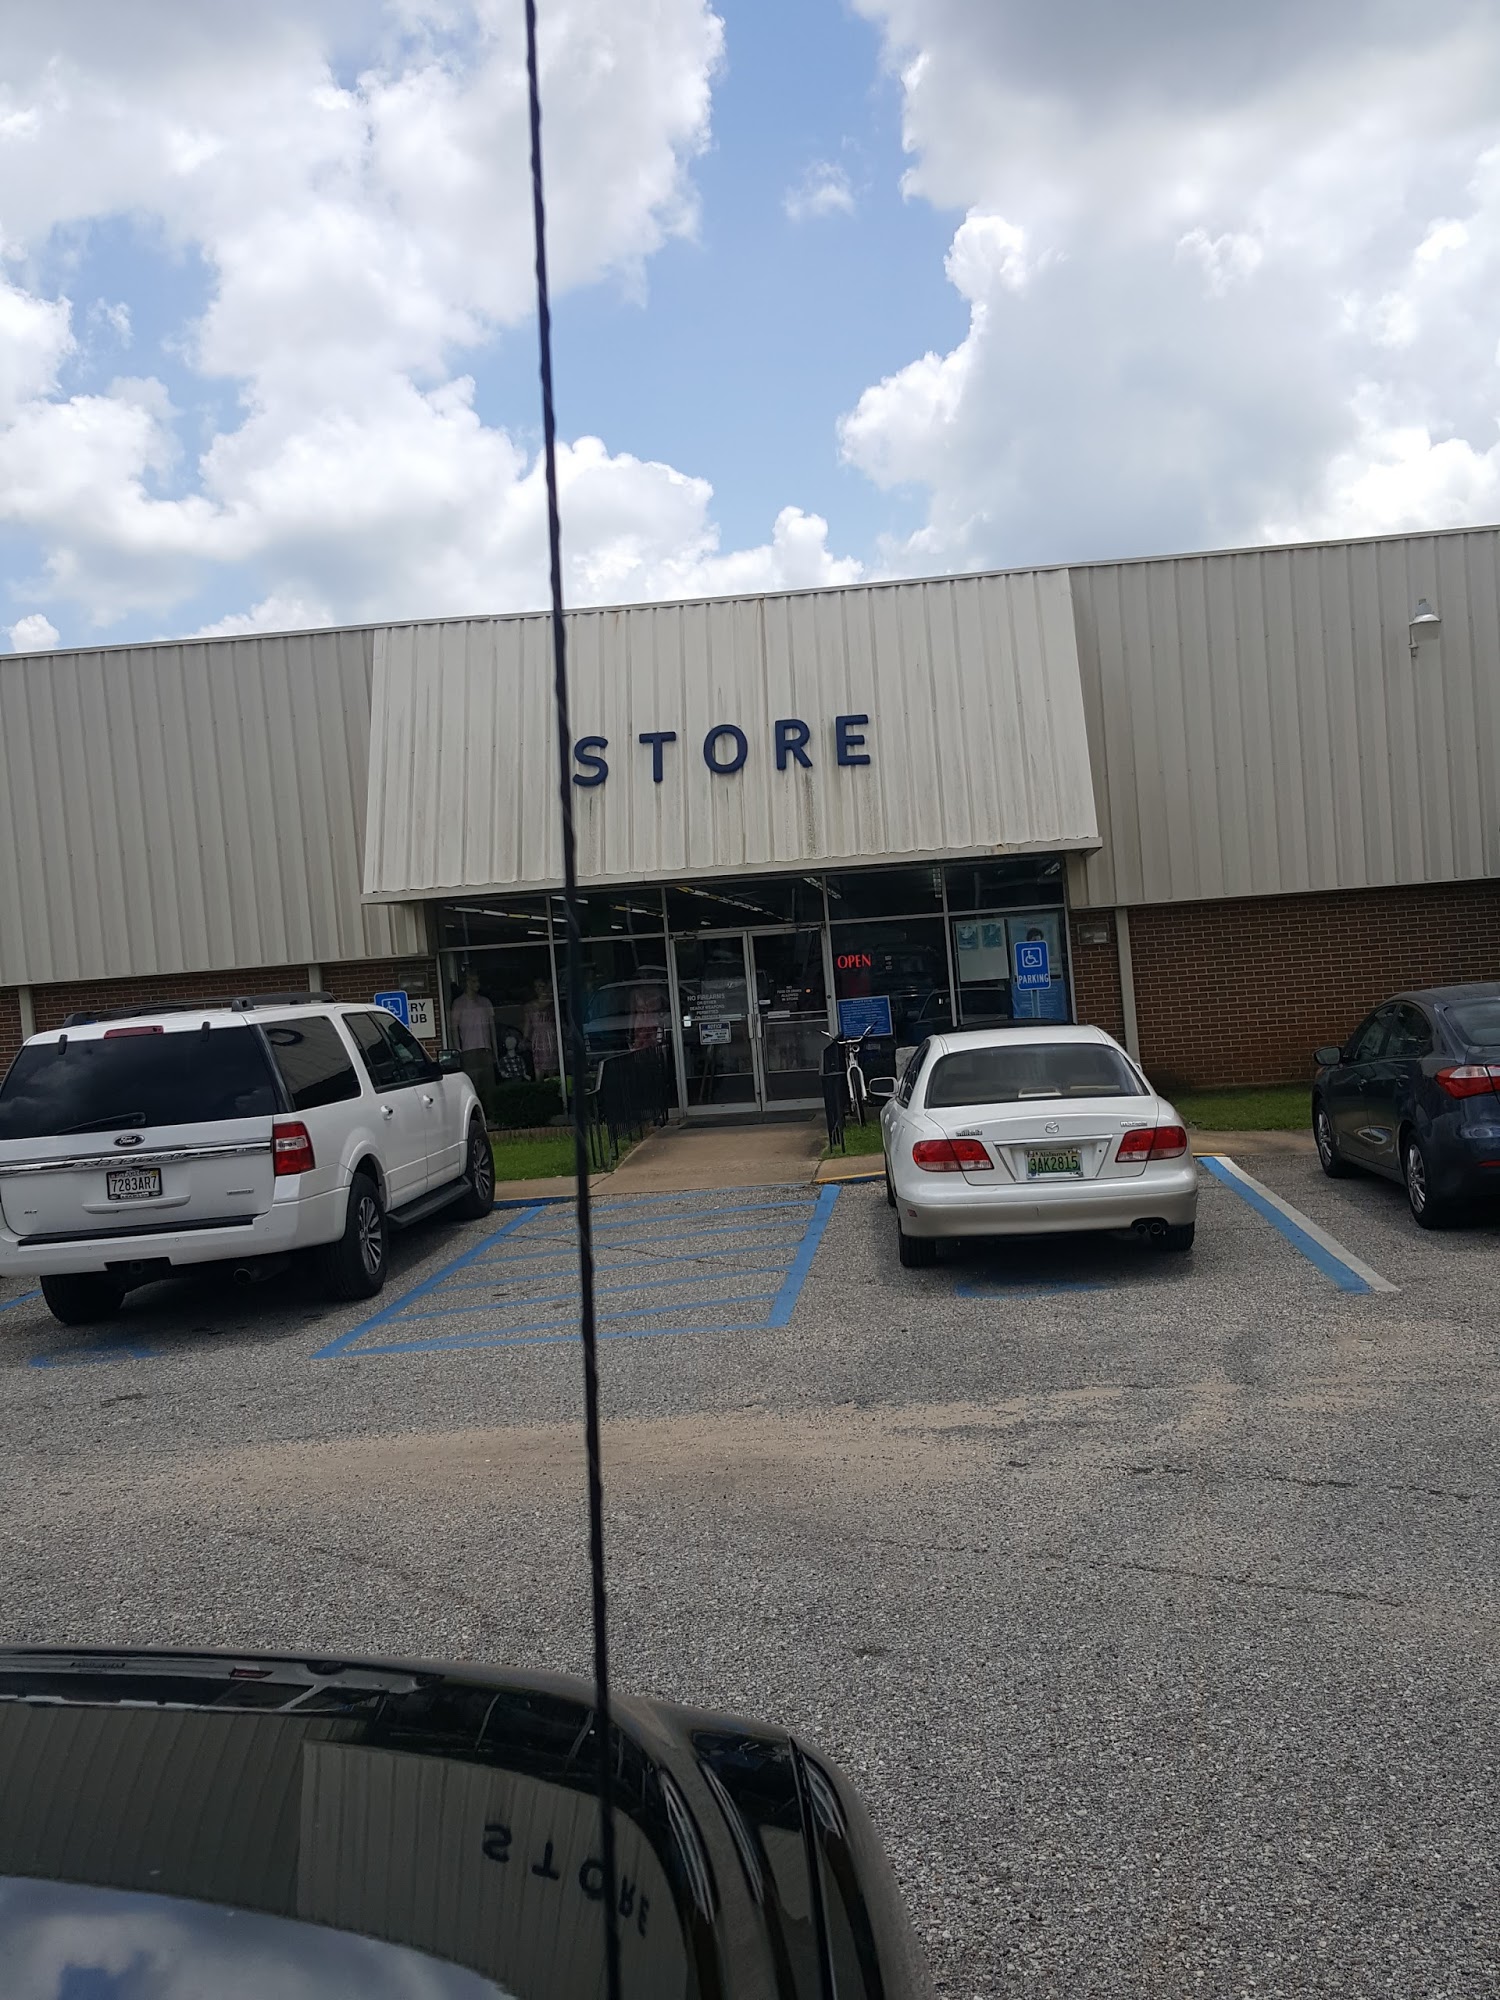 Goodwill Industries of Central Alabama